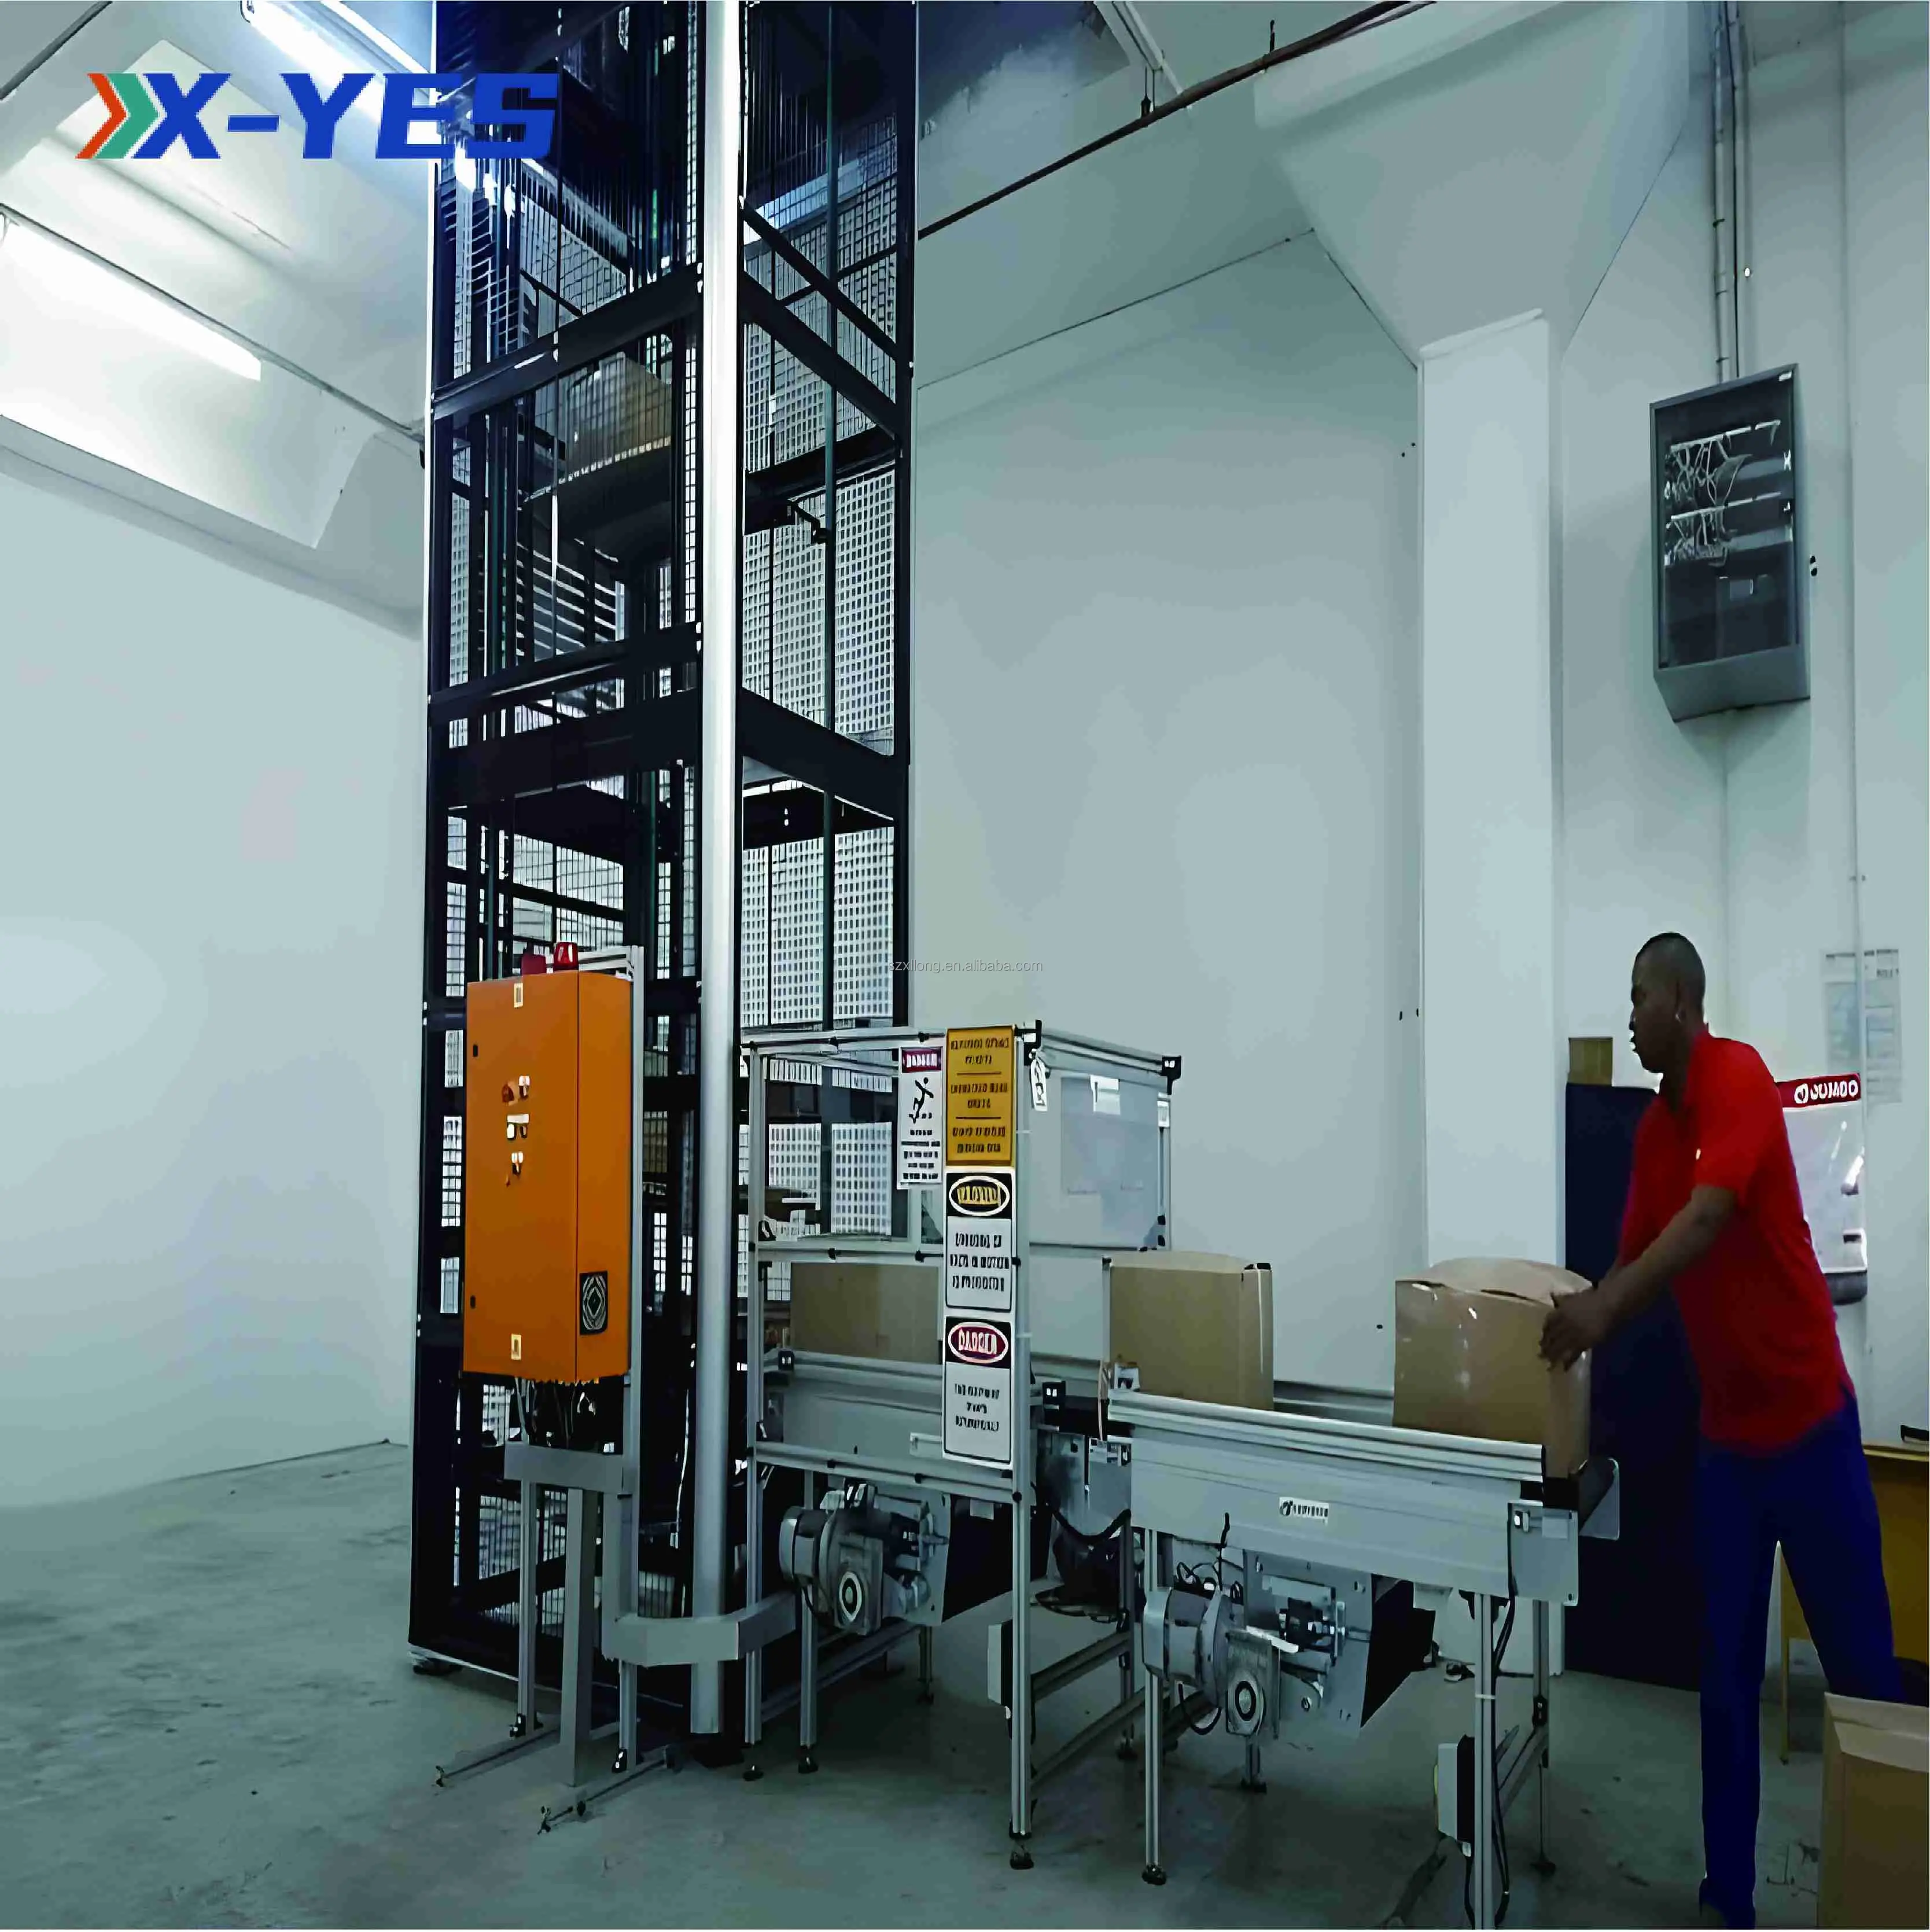 X-YES Optimizing Cost Structures  Increasing Profits Continuous Vertical Conveyor Vertical Lift Conveyor